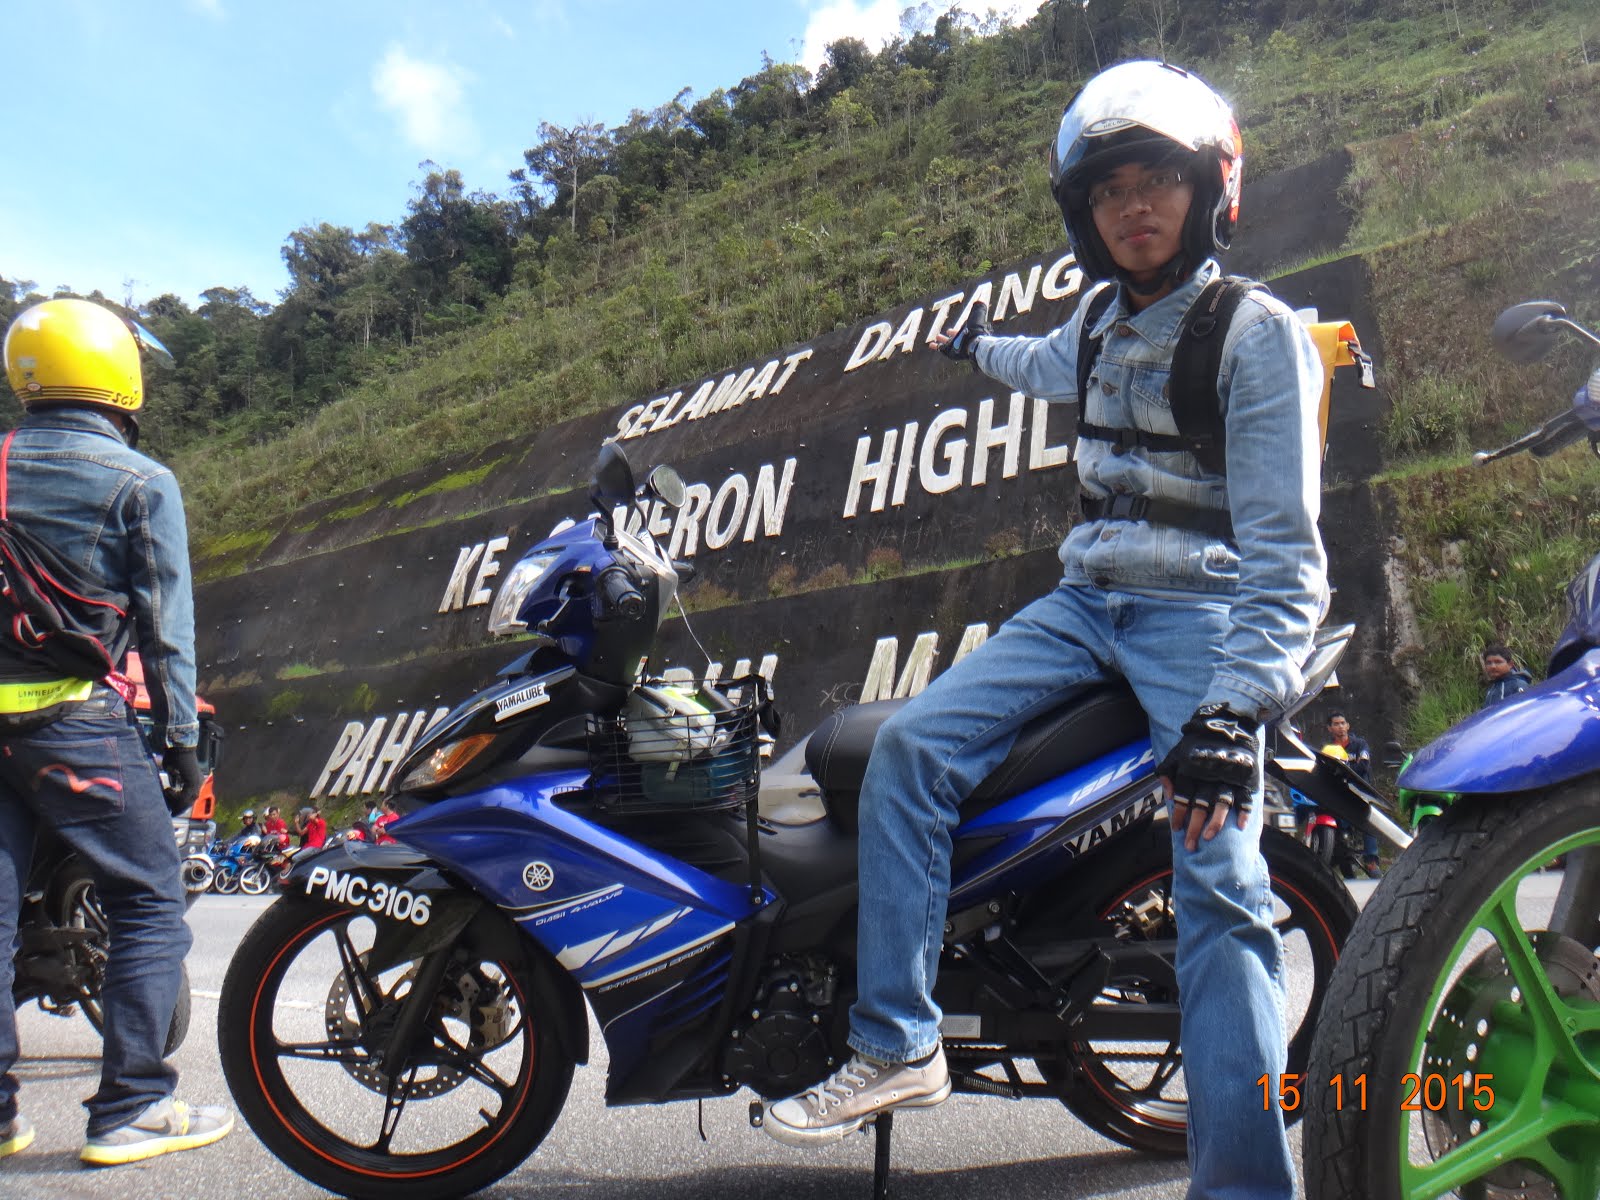 First long ride to Cameron Highland